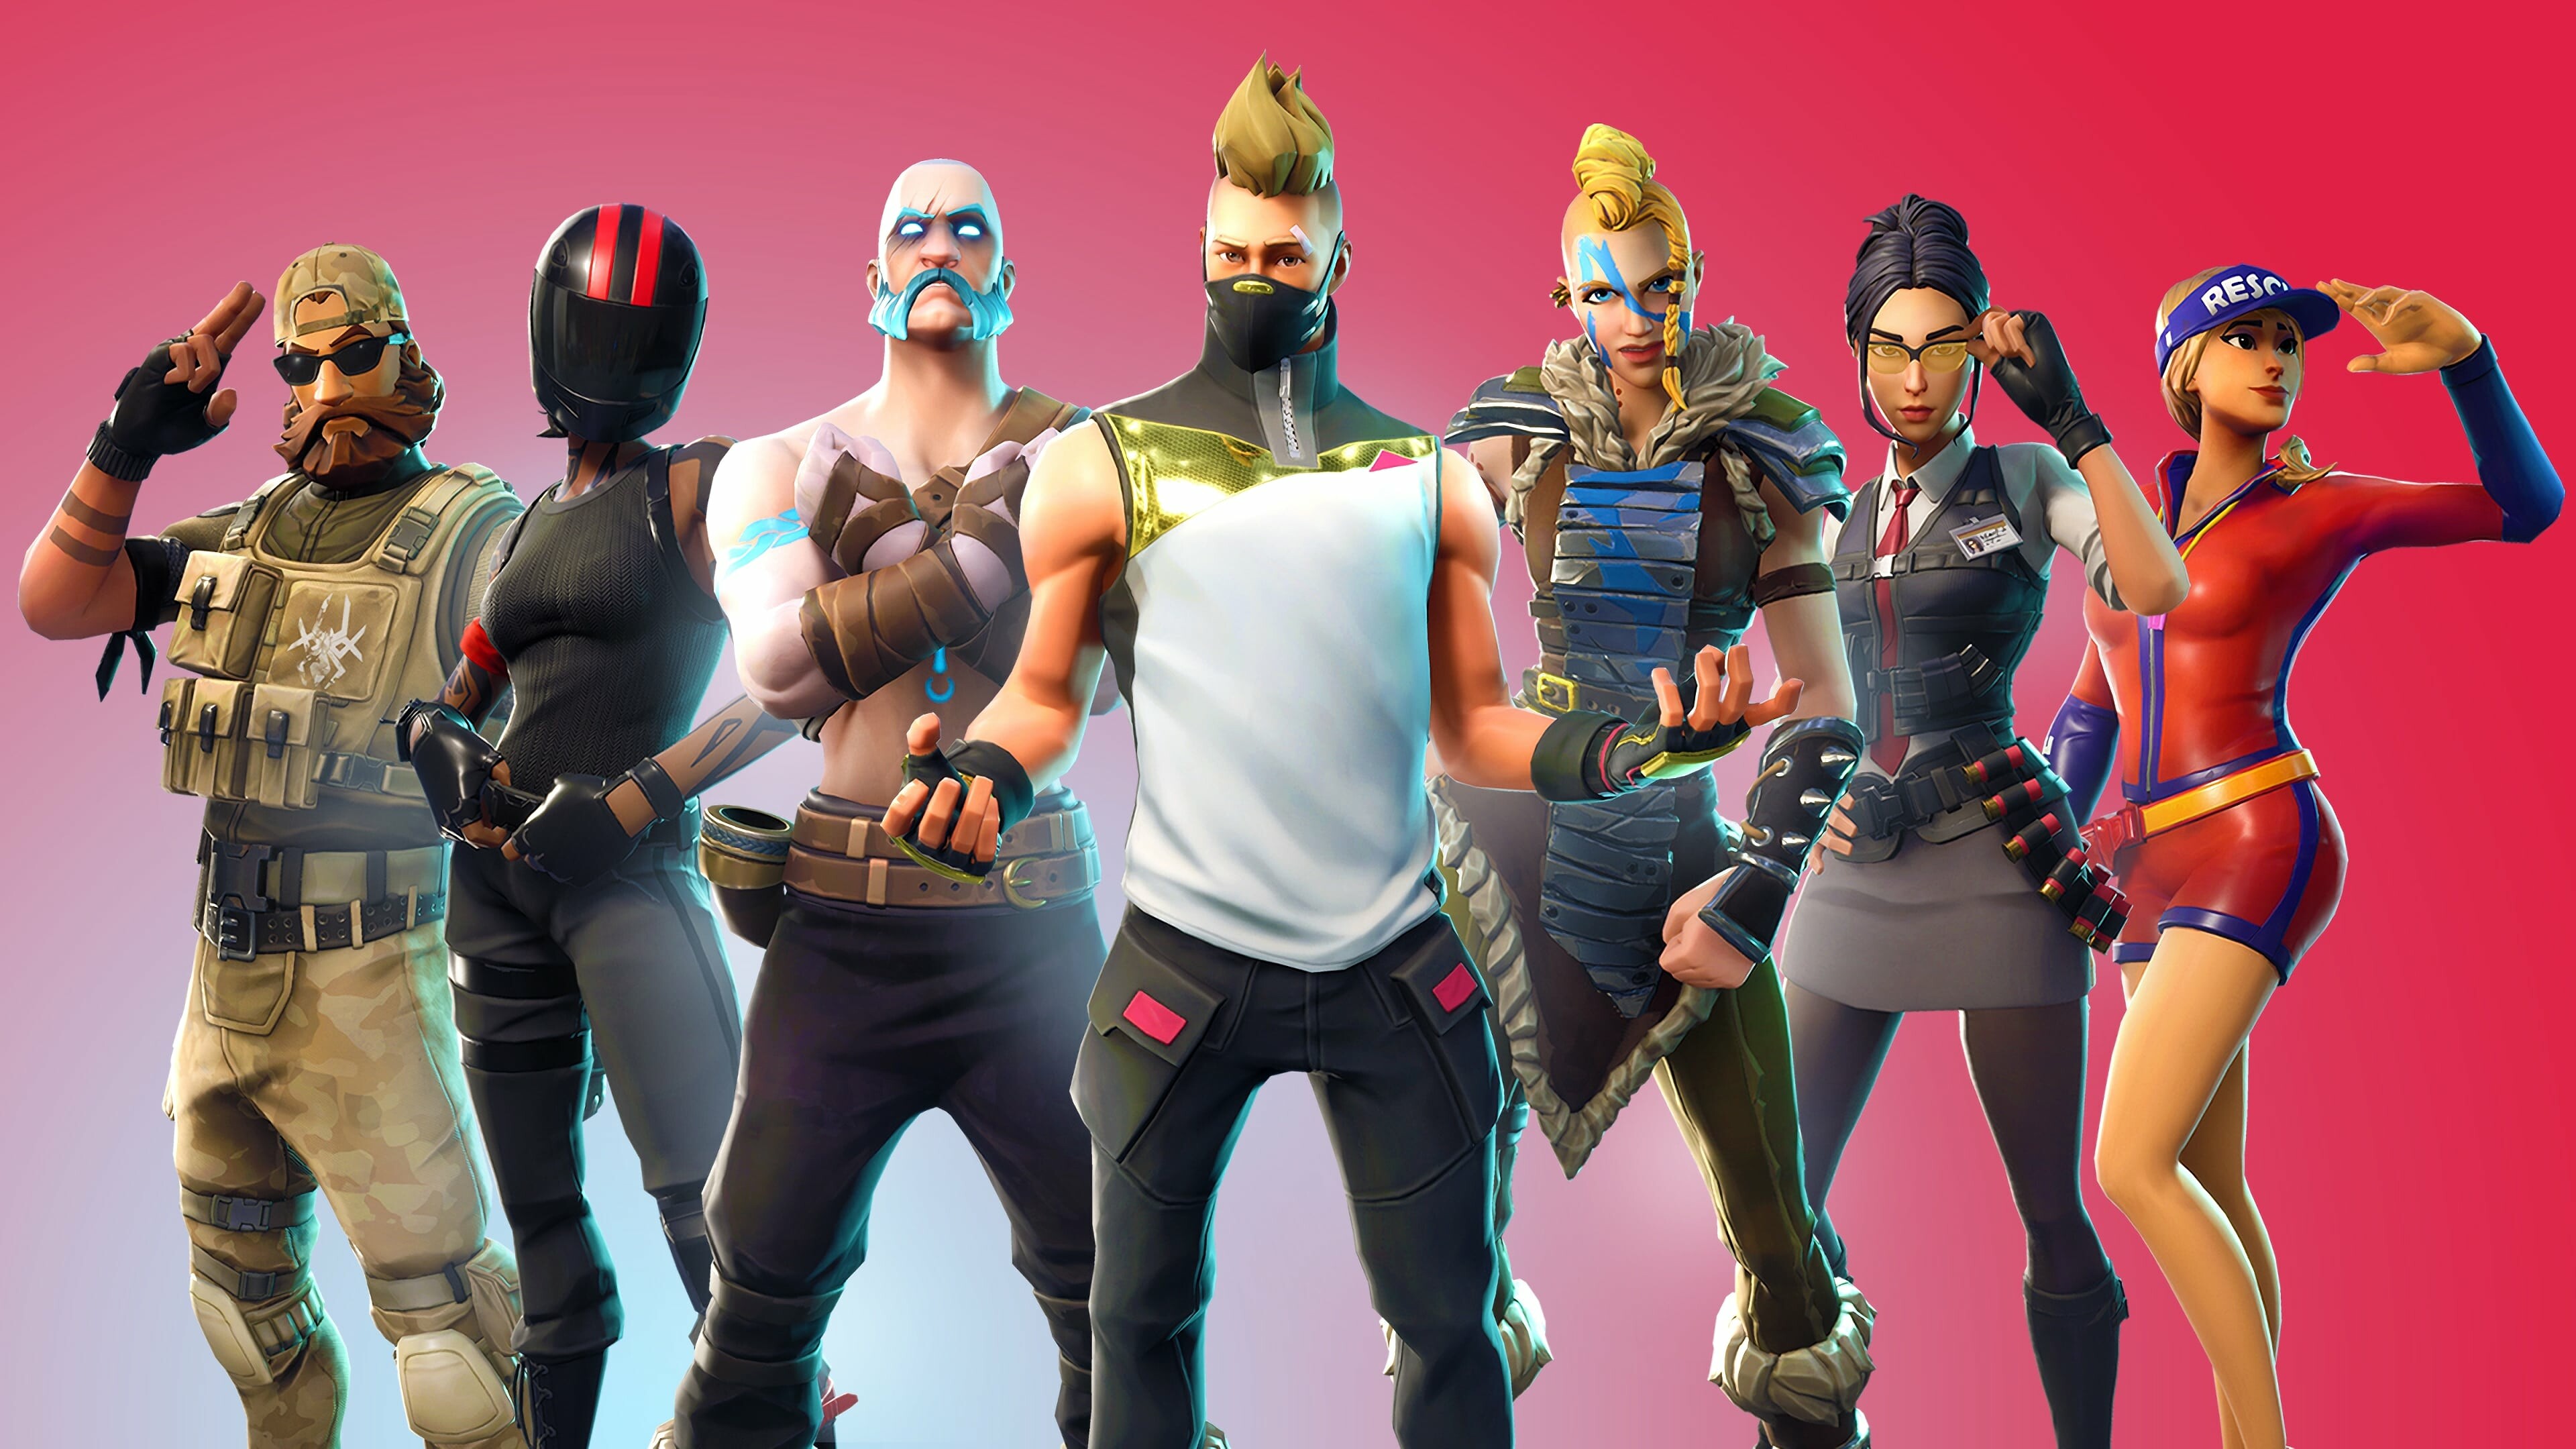 Fortnite: Season 5, Continues the storyline that was started in Season 3, A battle royale game. 3840x2160 4K Background.